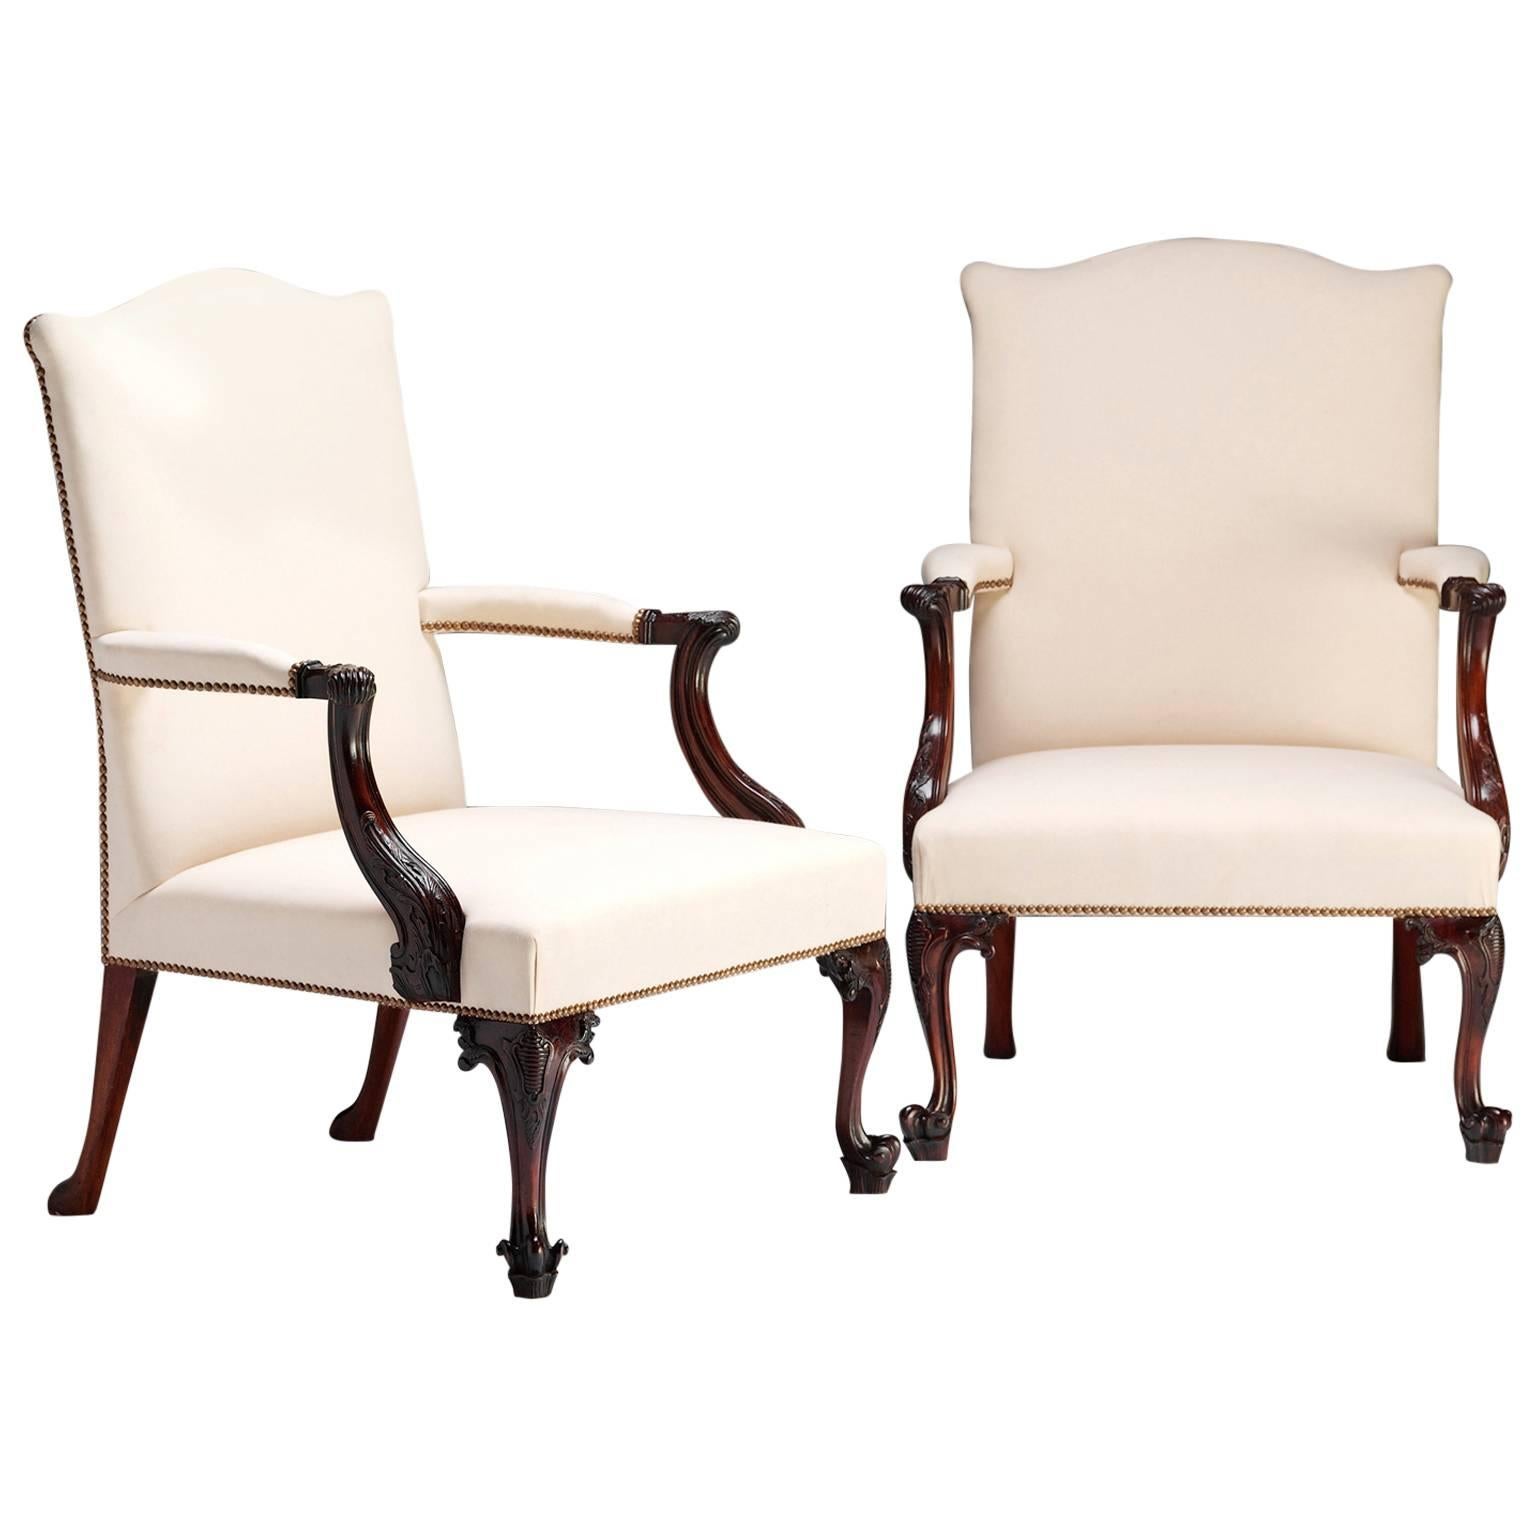 Gainsborough Chairs in the Chippendale manner